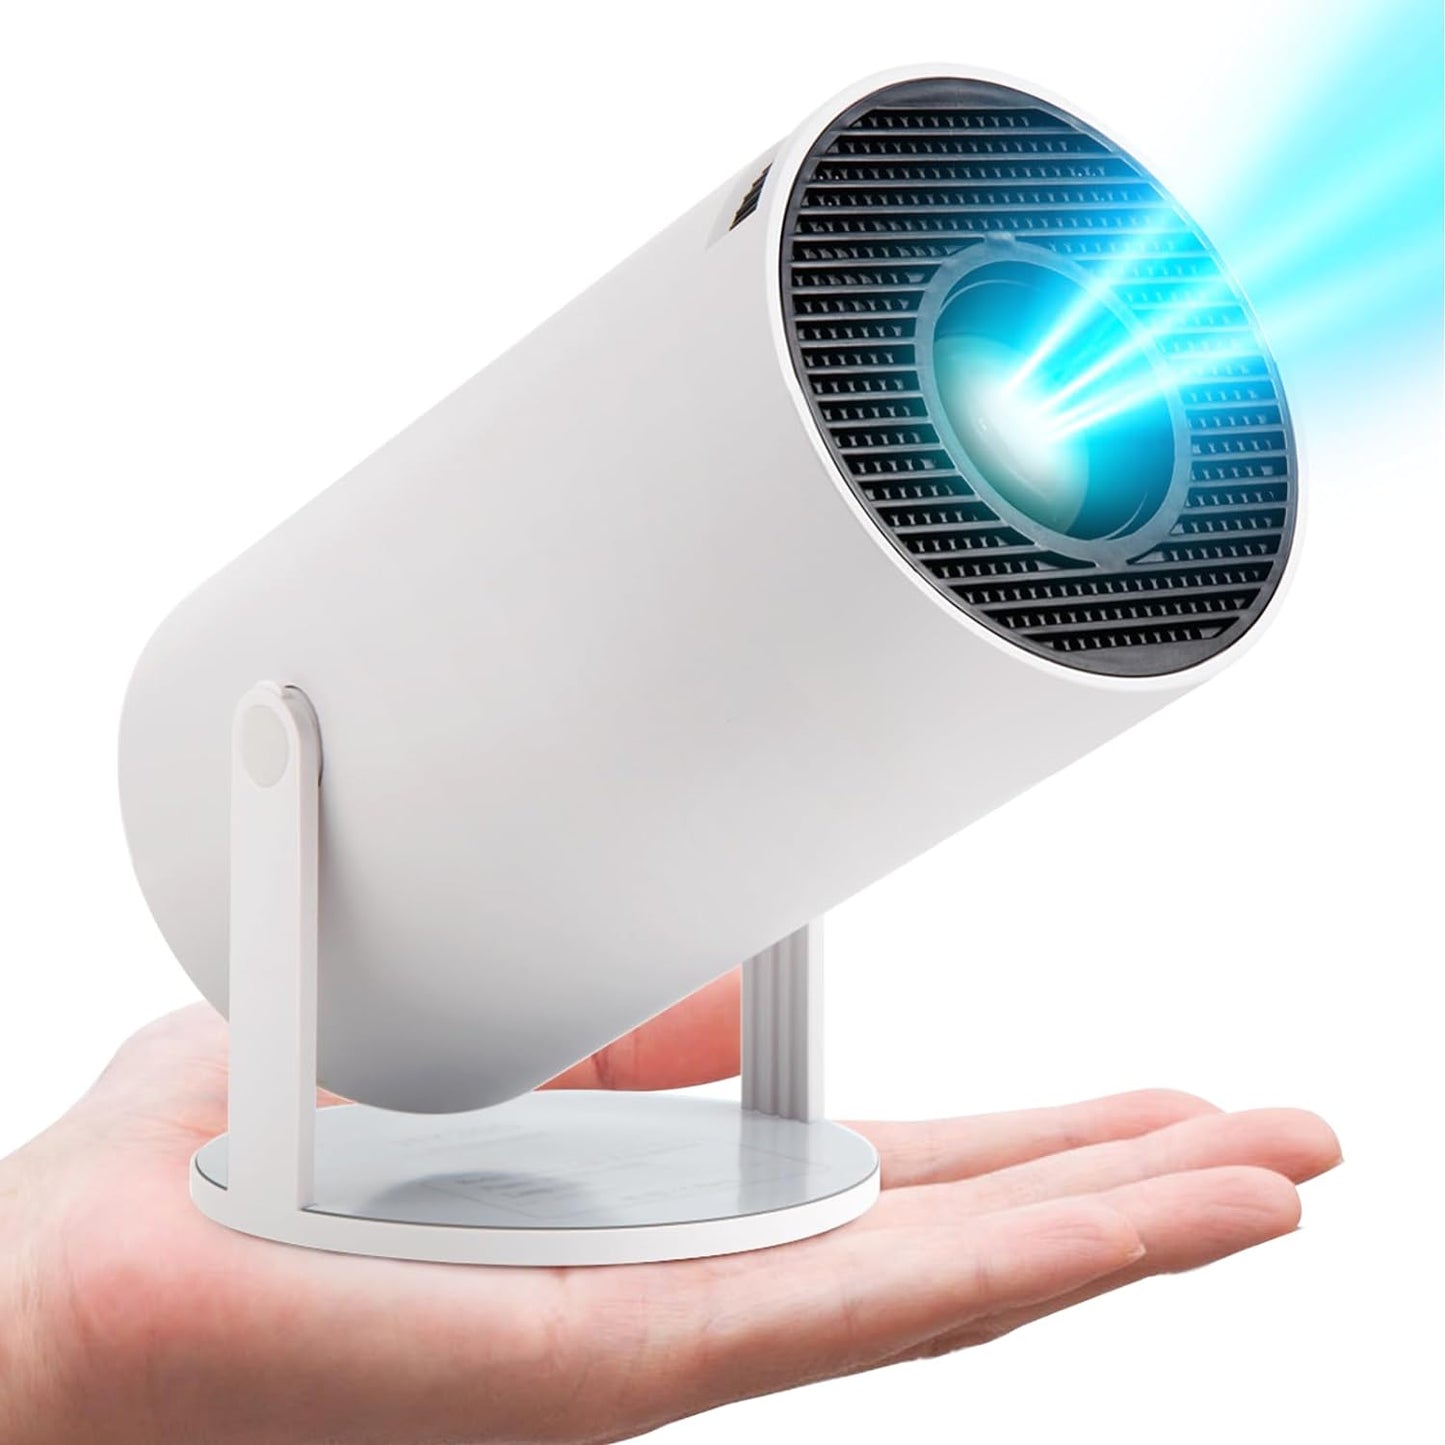 PureVision Projector